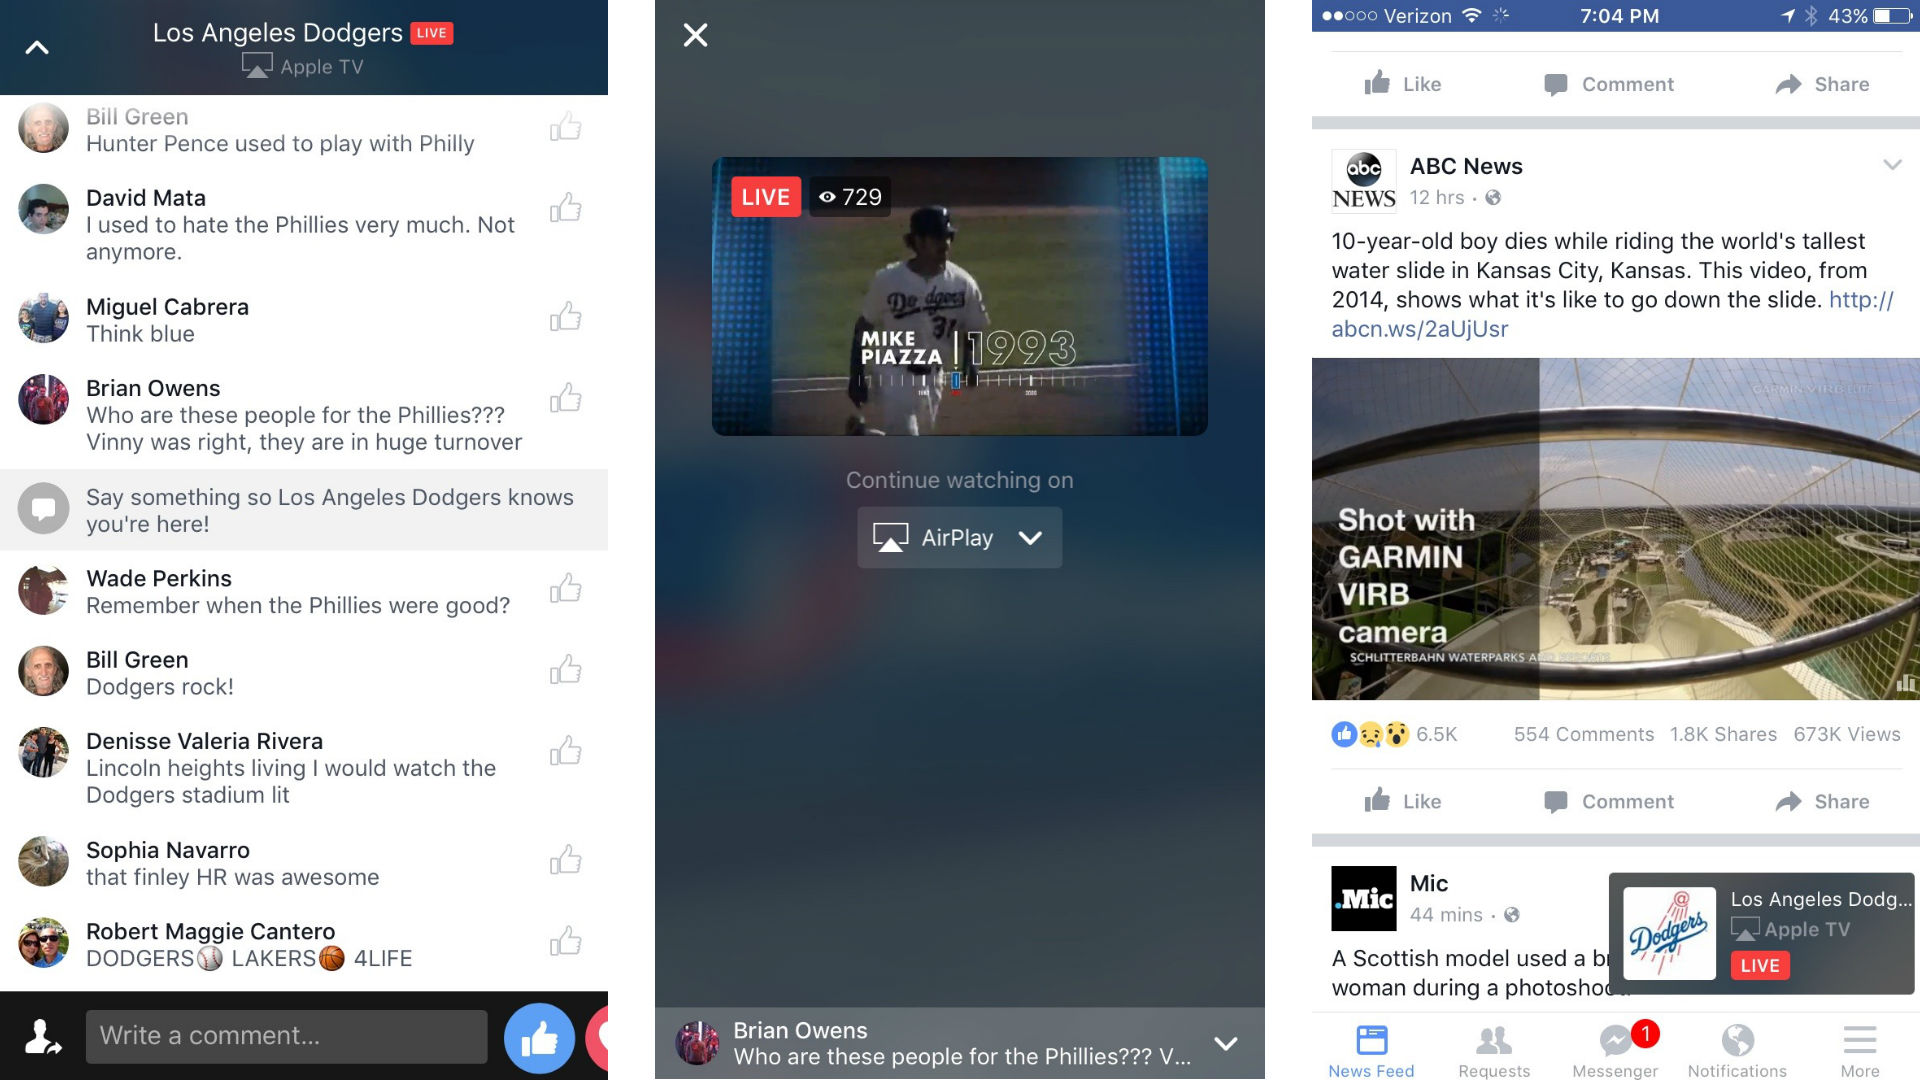 Facebook tests streaming videos to TV using Apple’s AirPlay, Google’s Chromecast